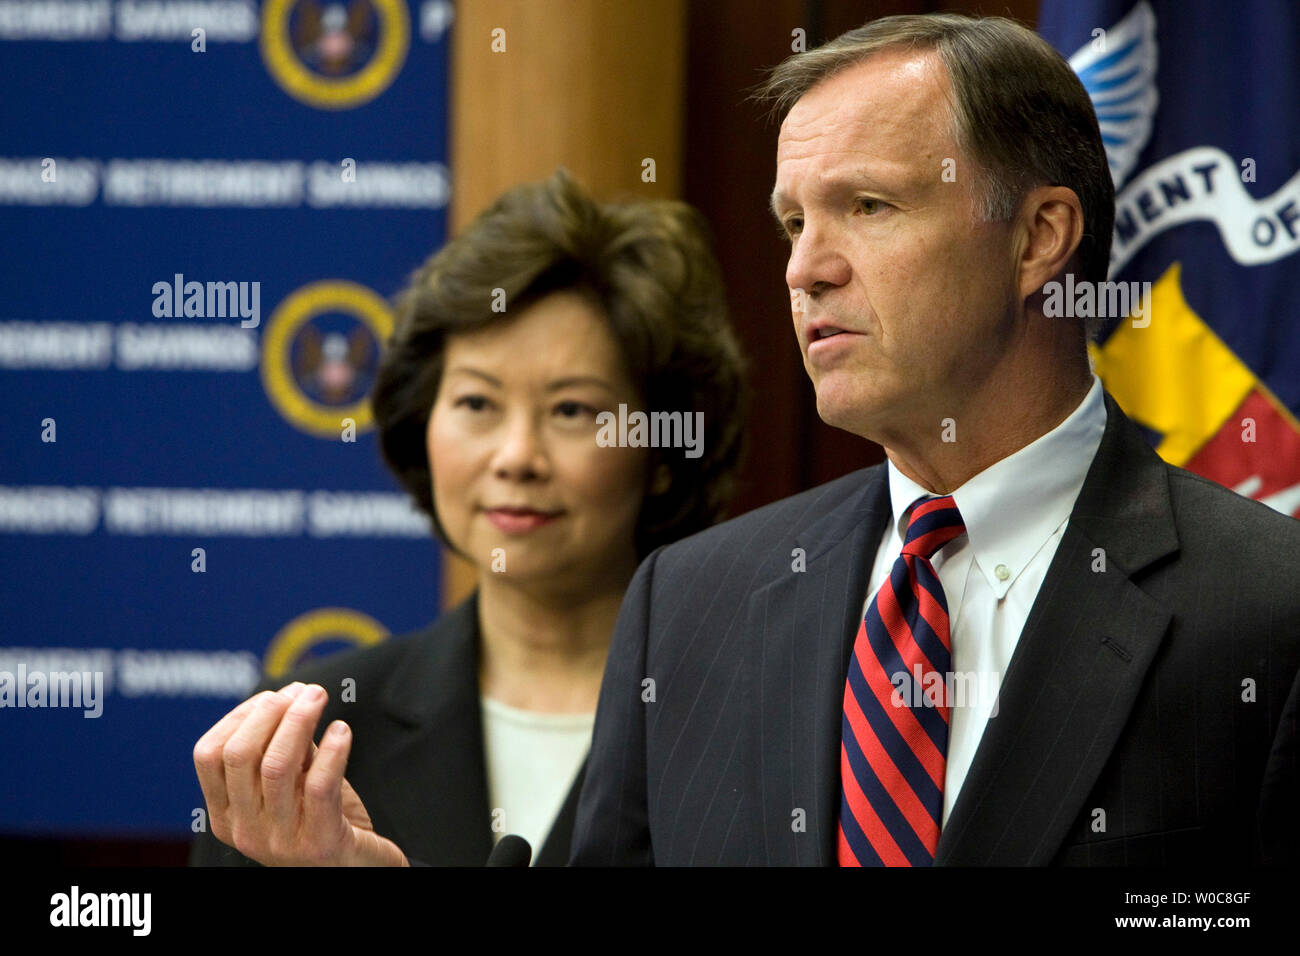 U.S. Department of Labor Secretary Elaine Chao (L) looks on as Securities and Exchange Commission Chairman Christopher Cox (R) delivers remarks during a signing ceremony of a Memorandum of Understanding between the Labor Department and the Securities and Exchange Commission in Washington on July 29, 2008. The agreement will protect an estimated $5.5 trillion in assets of retirement investors nationwide. (UPI Photo/Patrick D. McDermott) Stock Photo